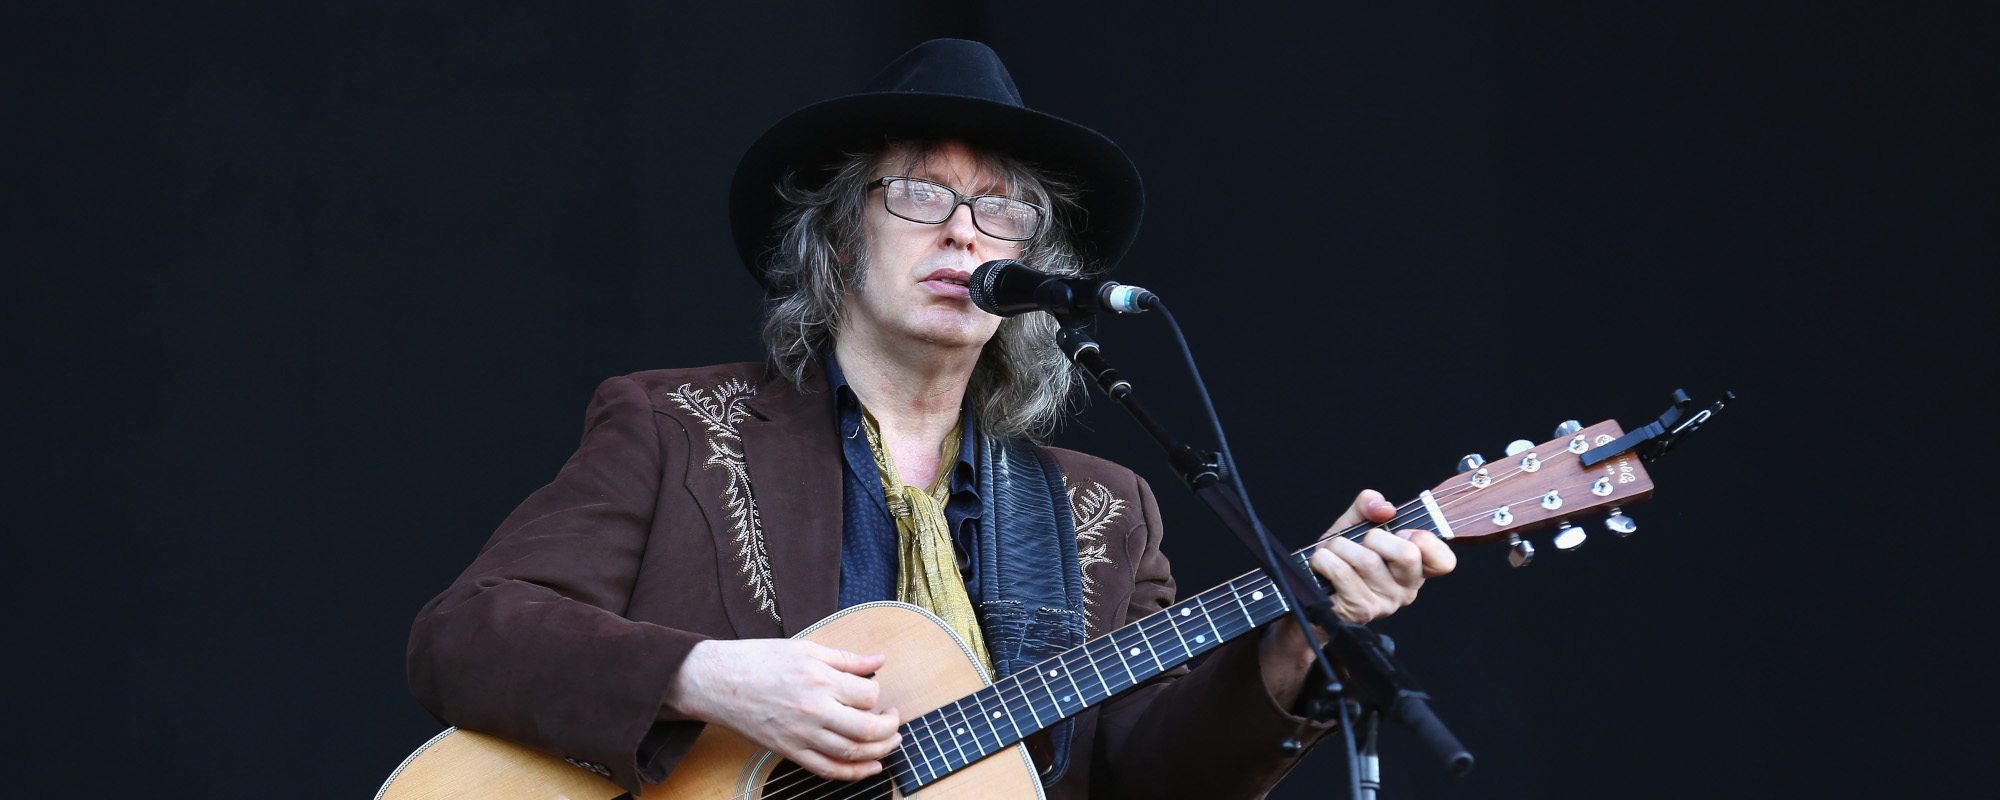 The Meaning Behind The Waterboys’ “The Whole of the Moon” and Its Connections to Prince